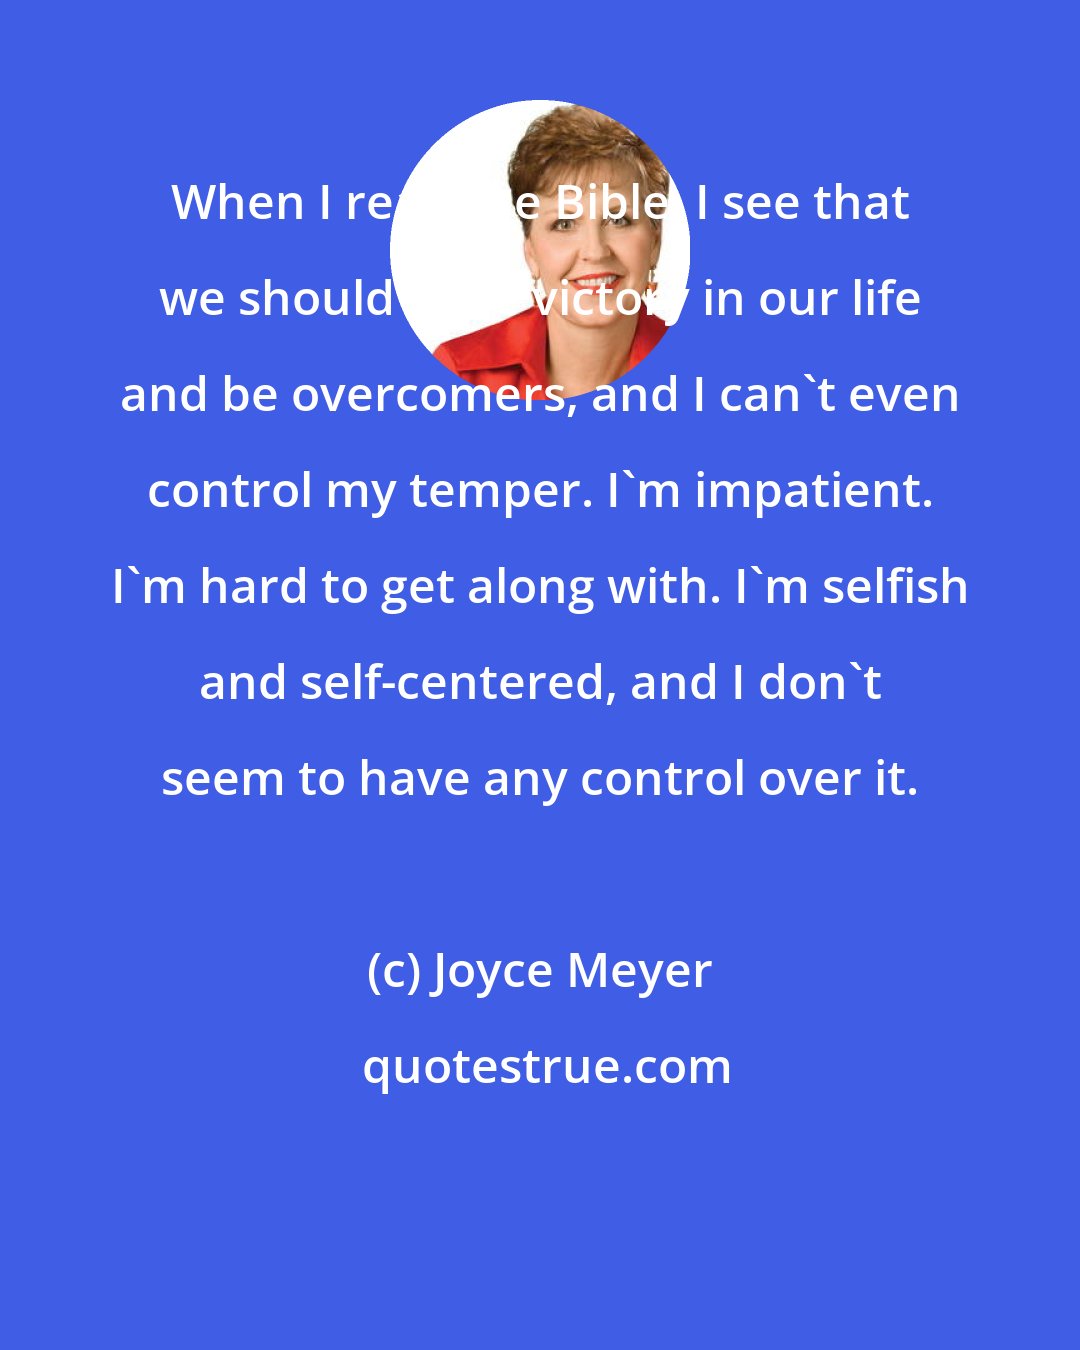 Joyce Meyer: When I read the Bible, I see that we should have victory in our life and be overcomers, and I can't even control my temper. I'm impatient. I'm hard to get along with. I'm selfish and self-centered, and I don't seem to have any control over it.